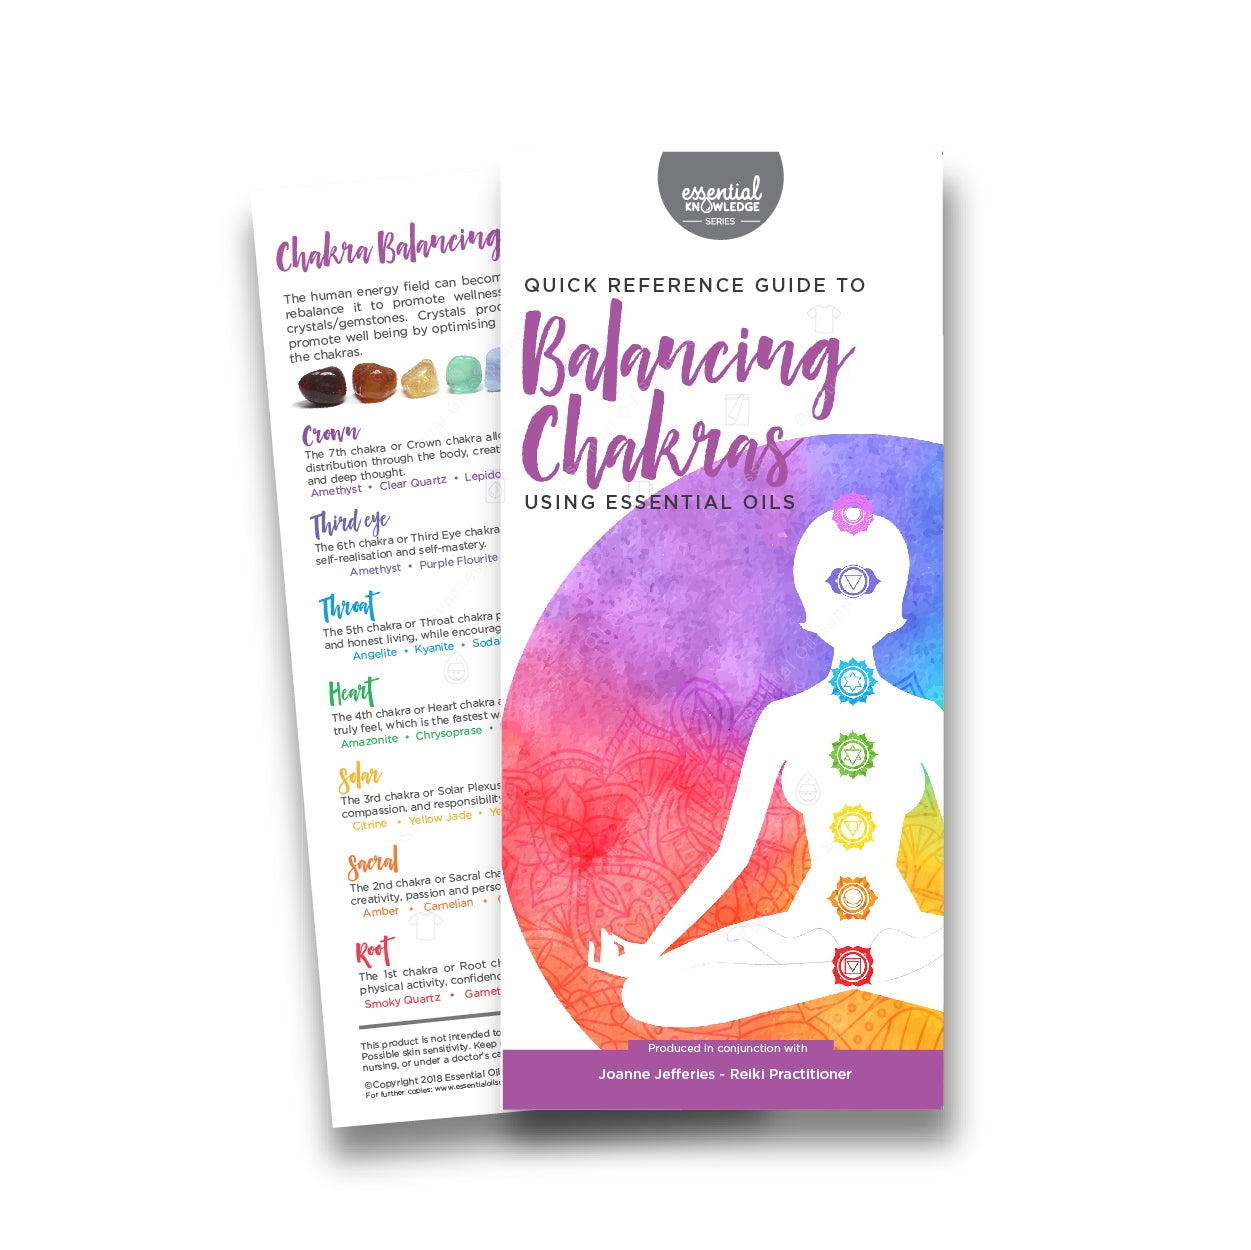 Infobrosjyre: Quick Reference Guide to Balancing Chakras Using Essential Oils